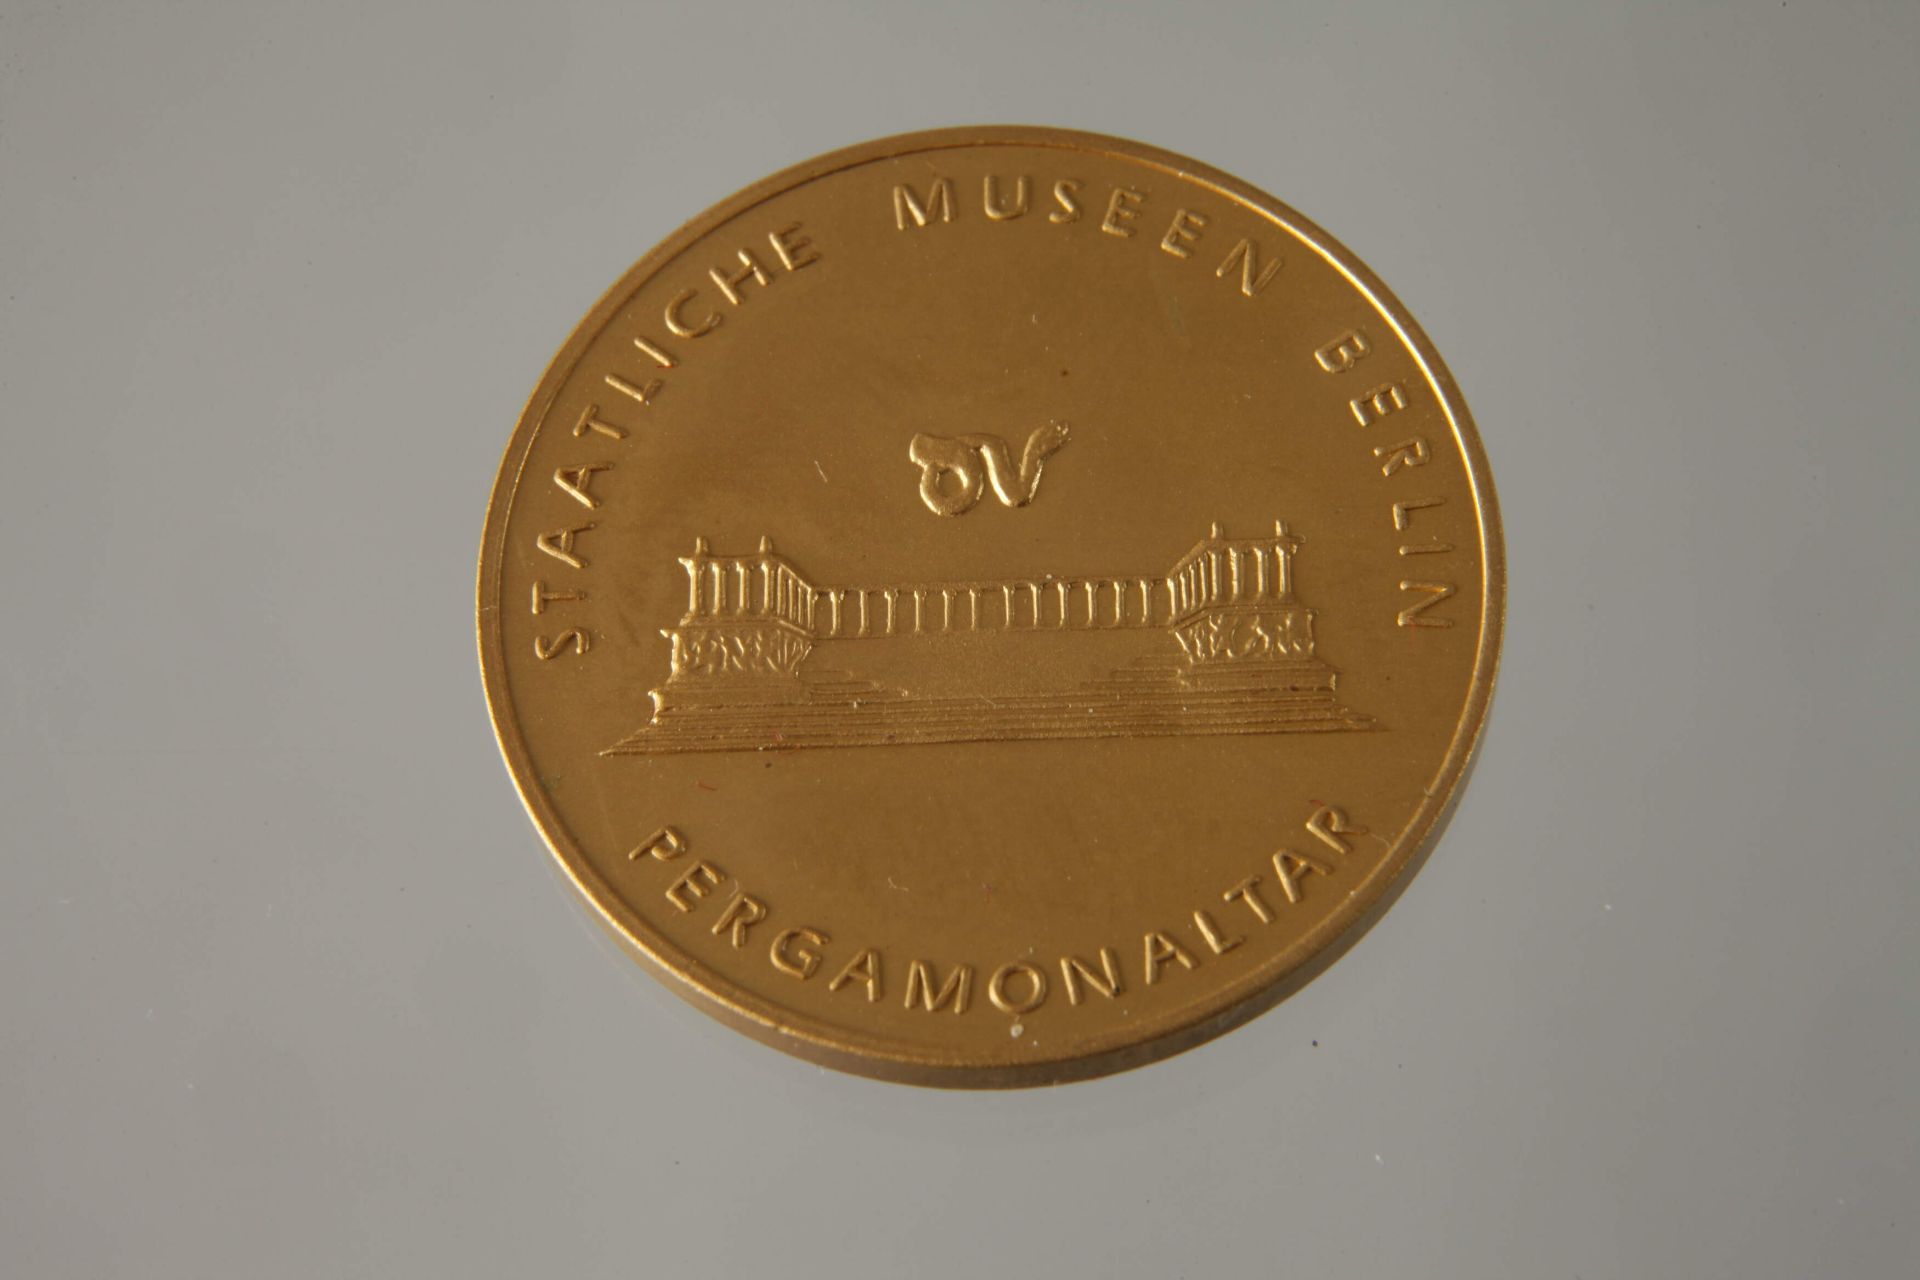 Goldmedaille Berlin DDR - Image 2 of 3